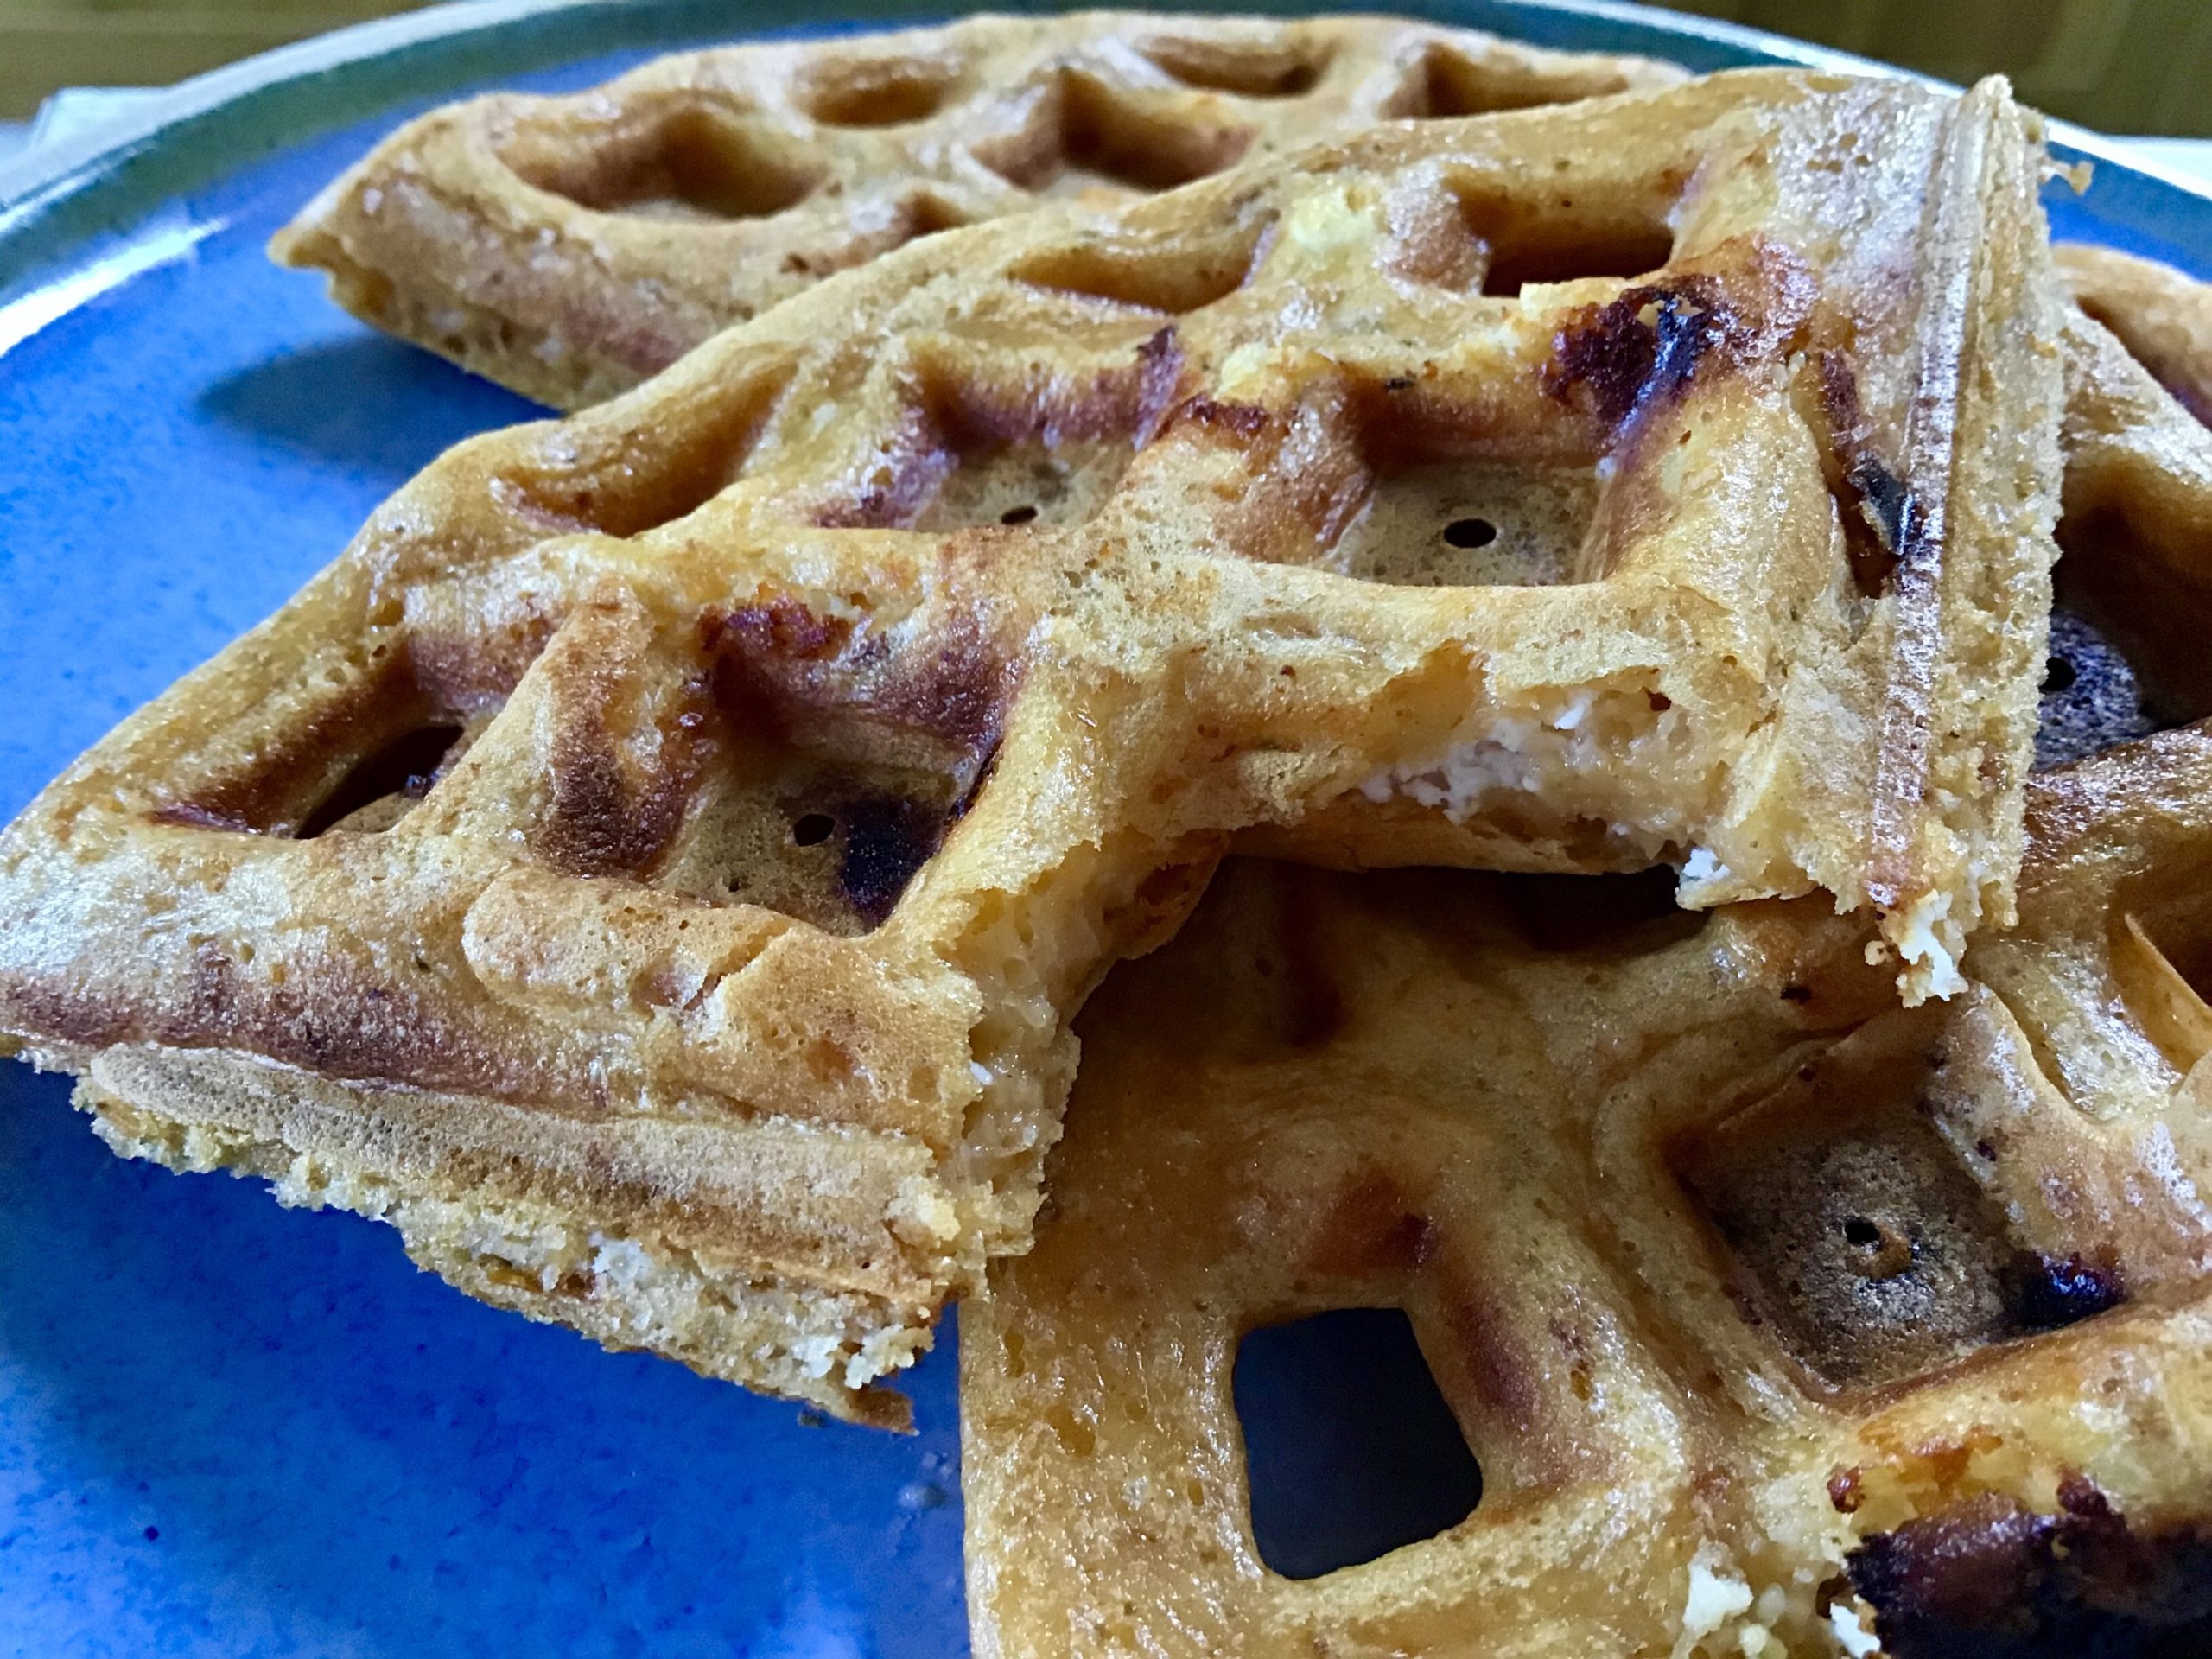 A close up of some waffles on a plate